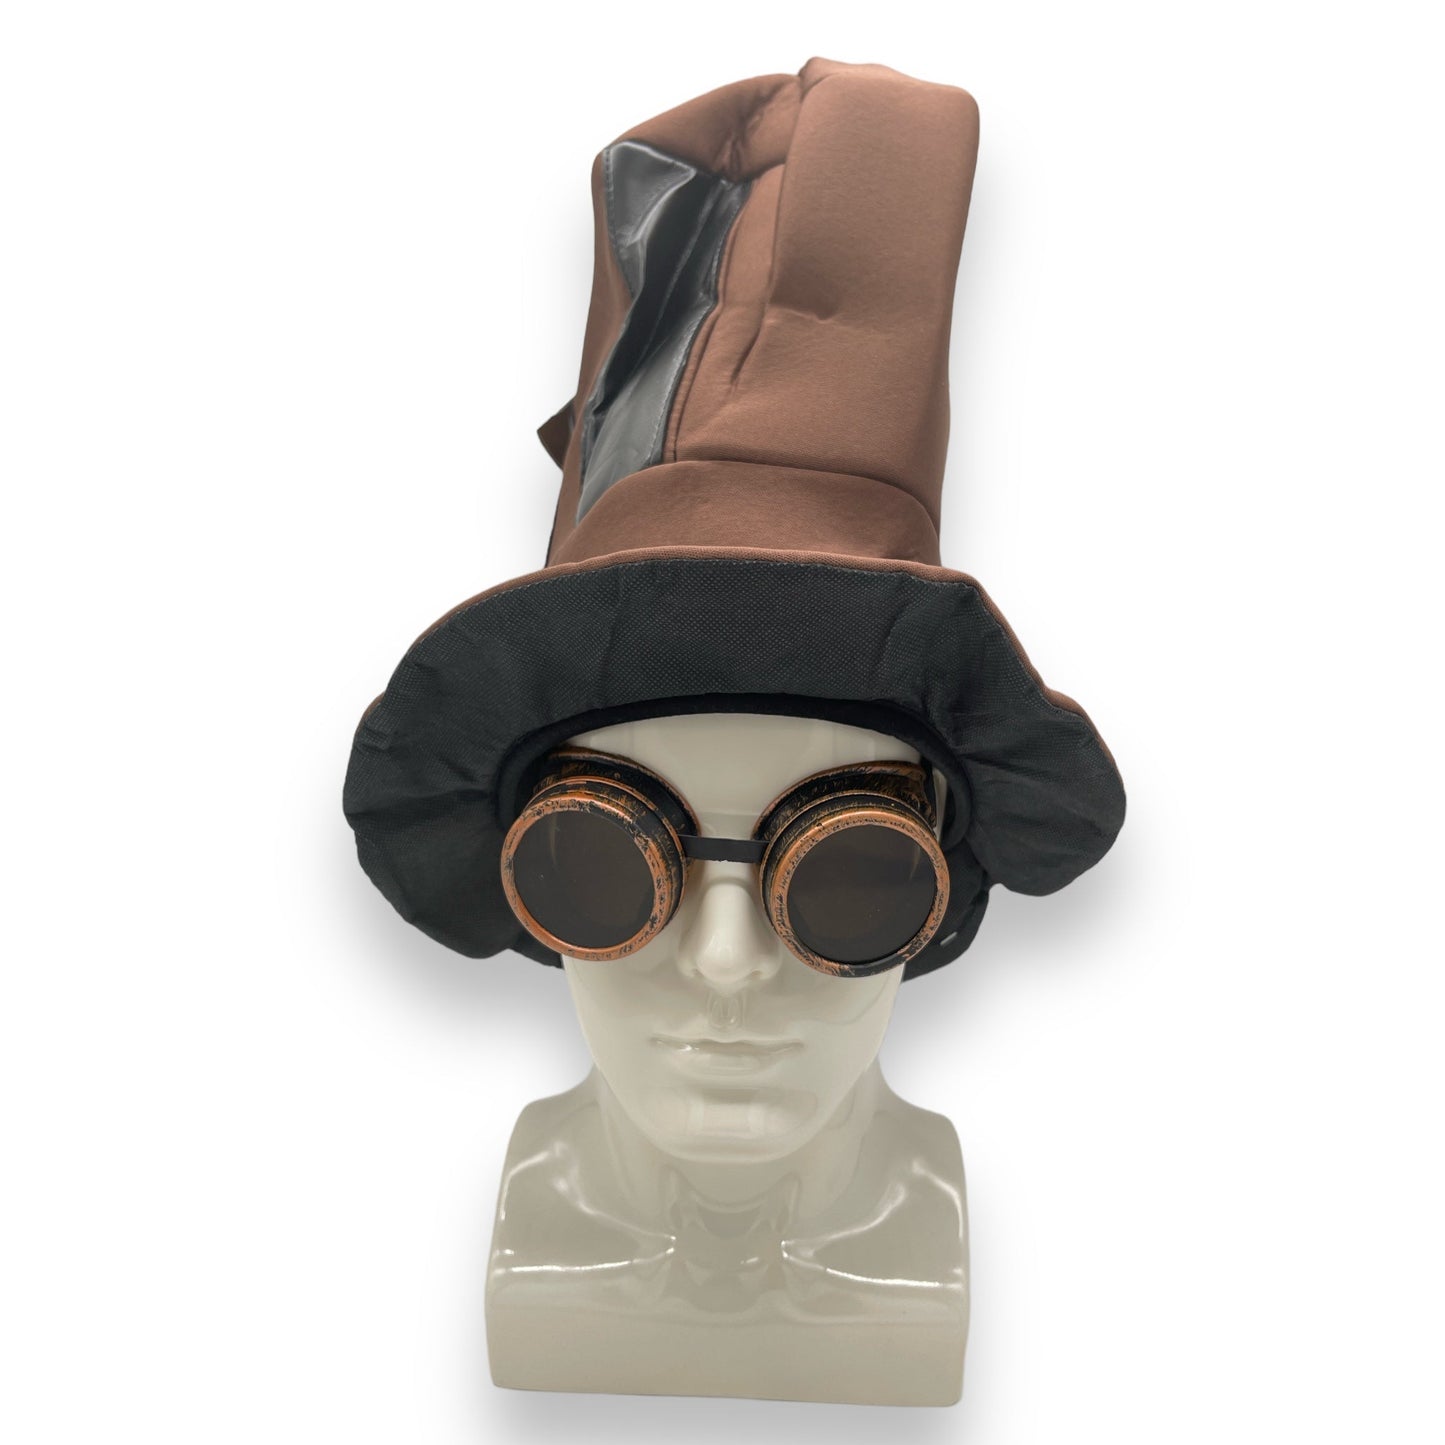 Kinky Pleasure - FT120 - Steampunk Top Hat with Goggles - Brown - 1 Piece